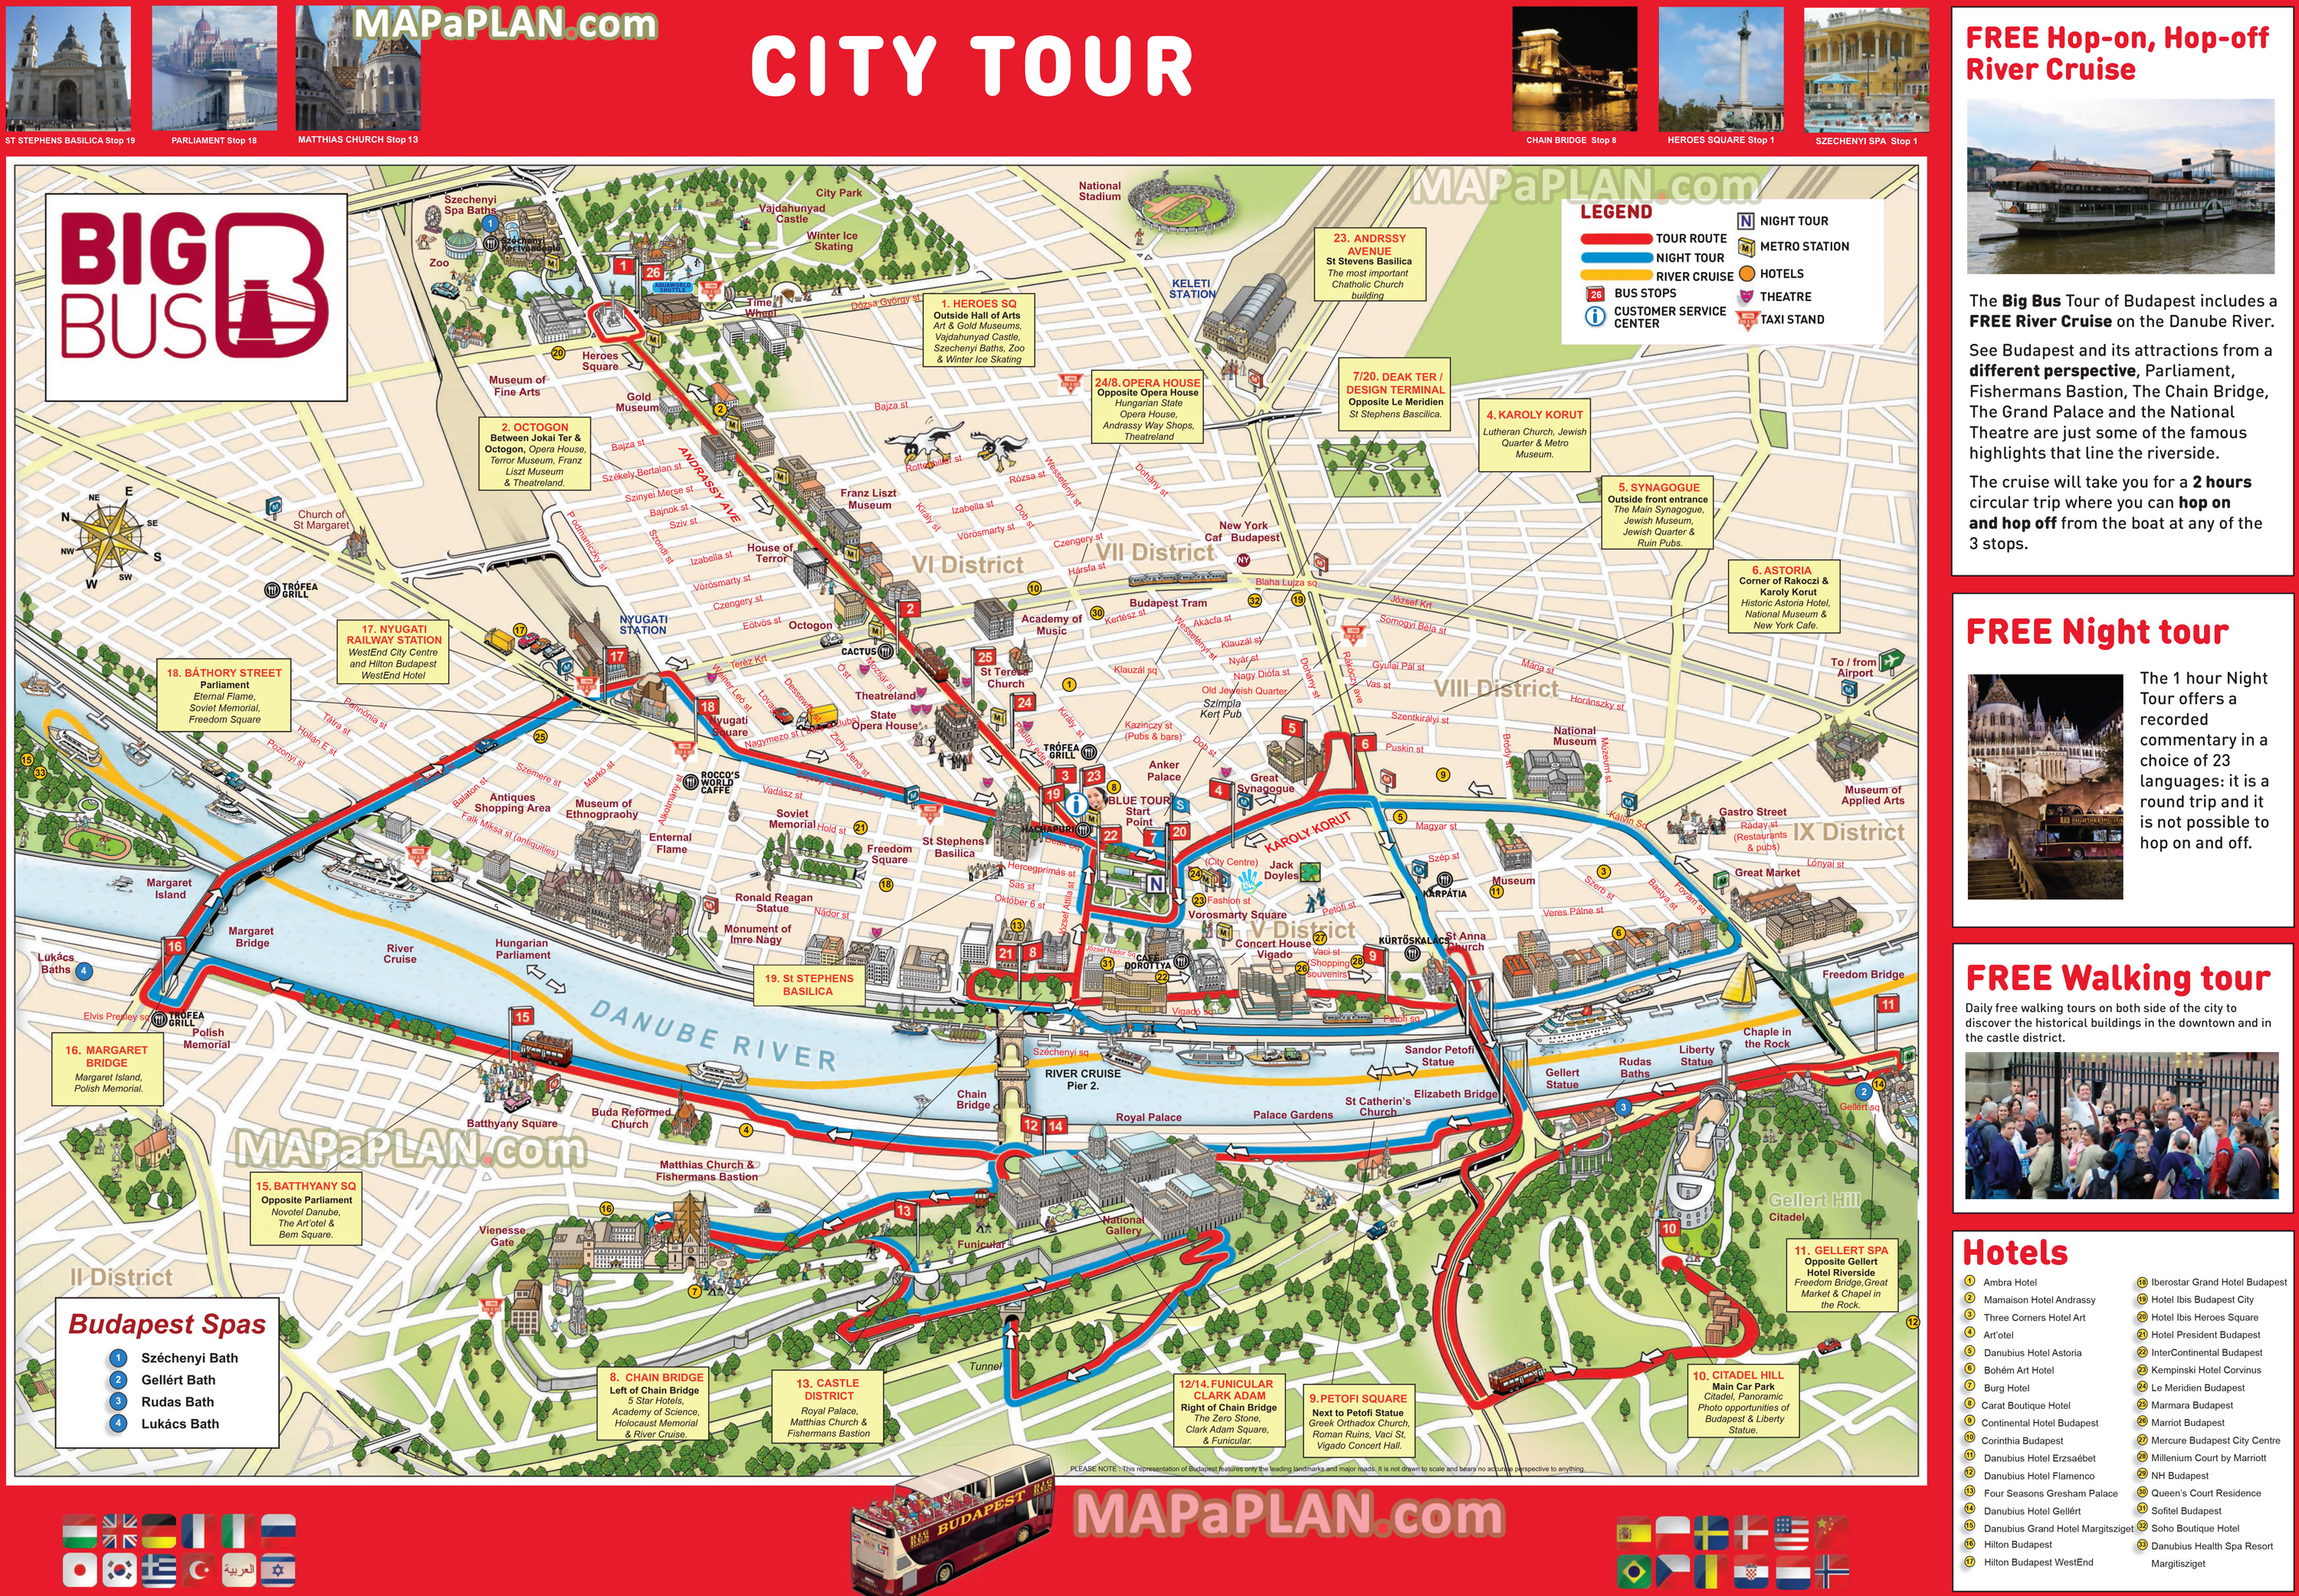 big bus city sightseeing hop on hop off double decker open top bus coach tour stops boat river cruise night hotel Budapest top tourist attractions map